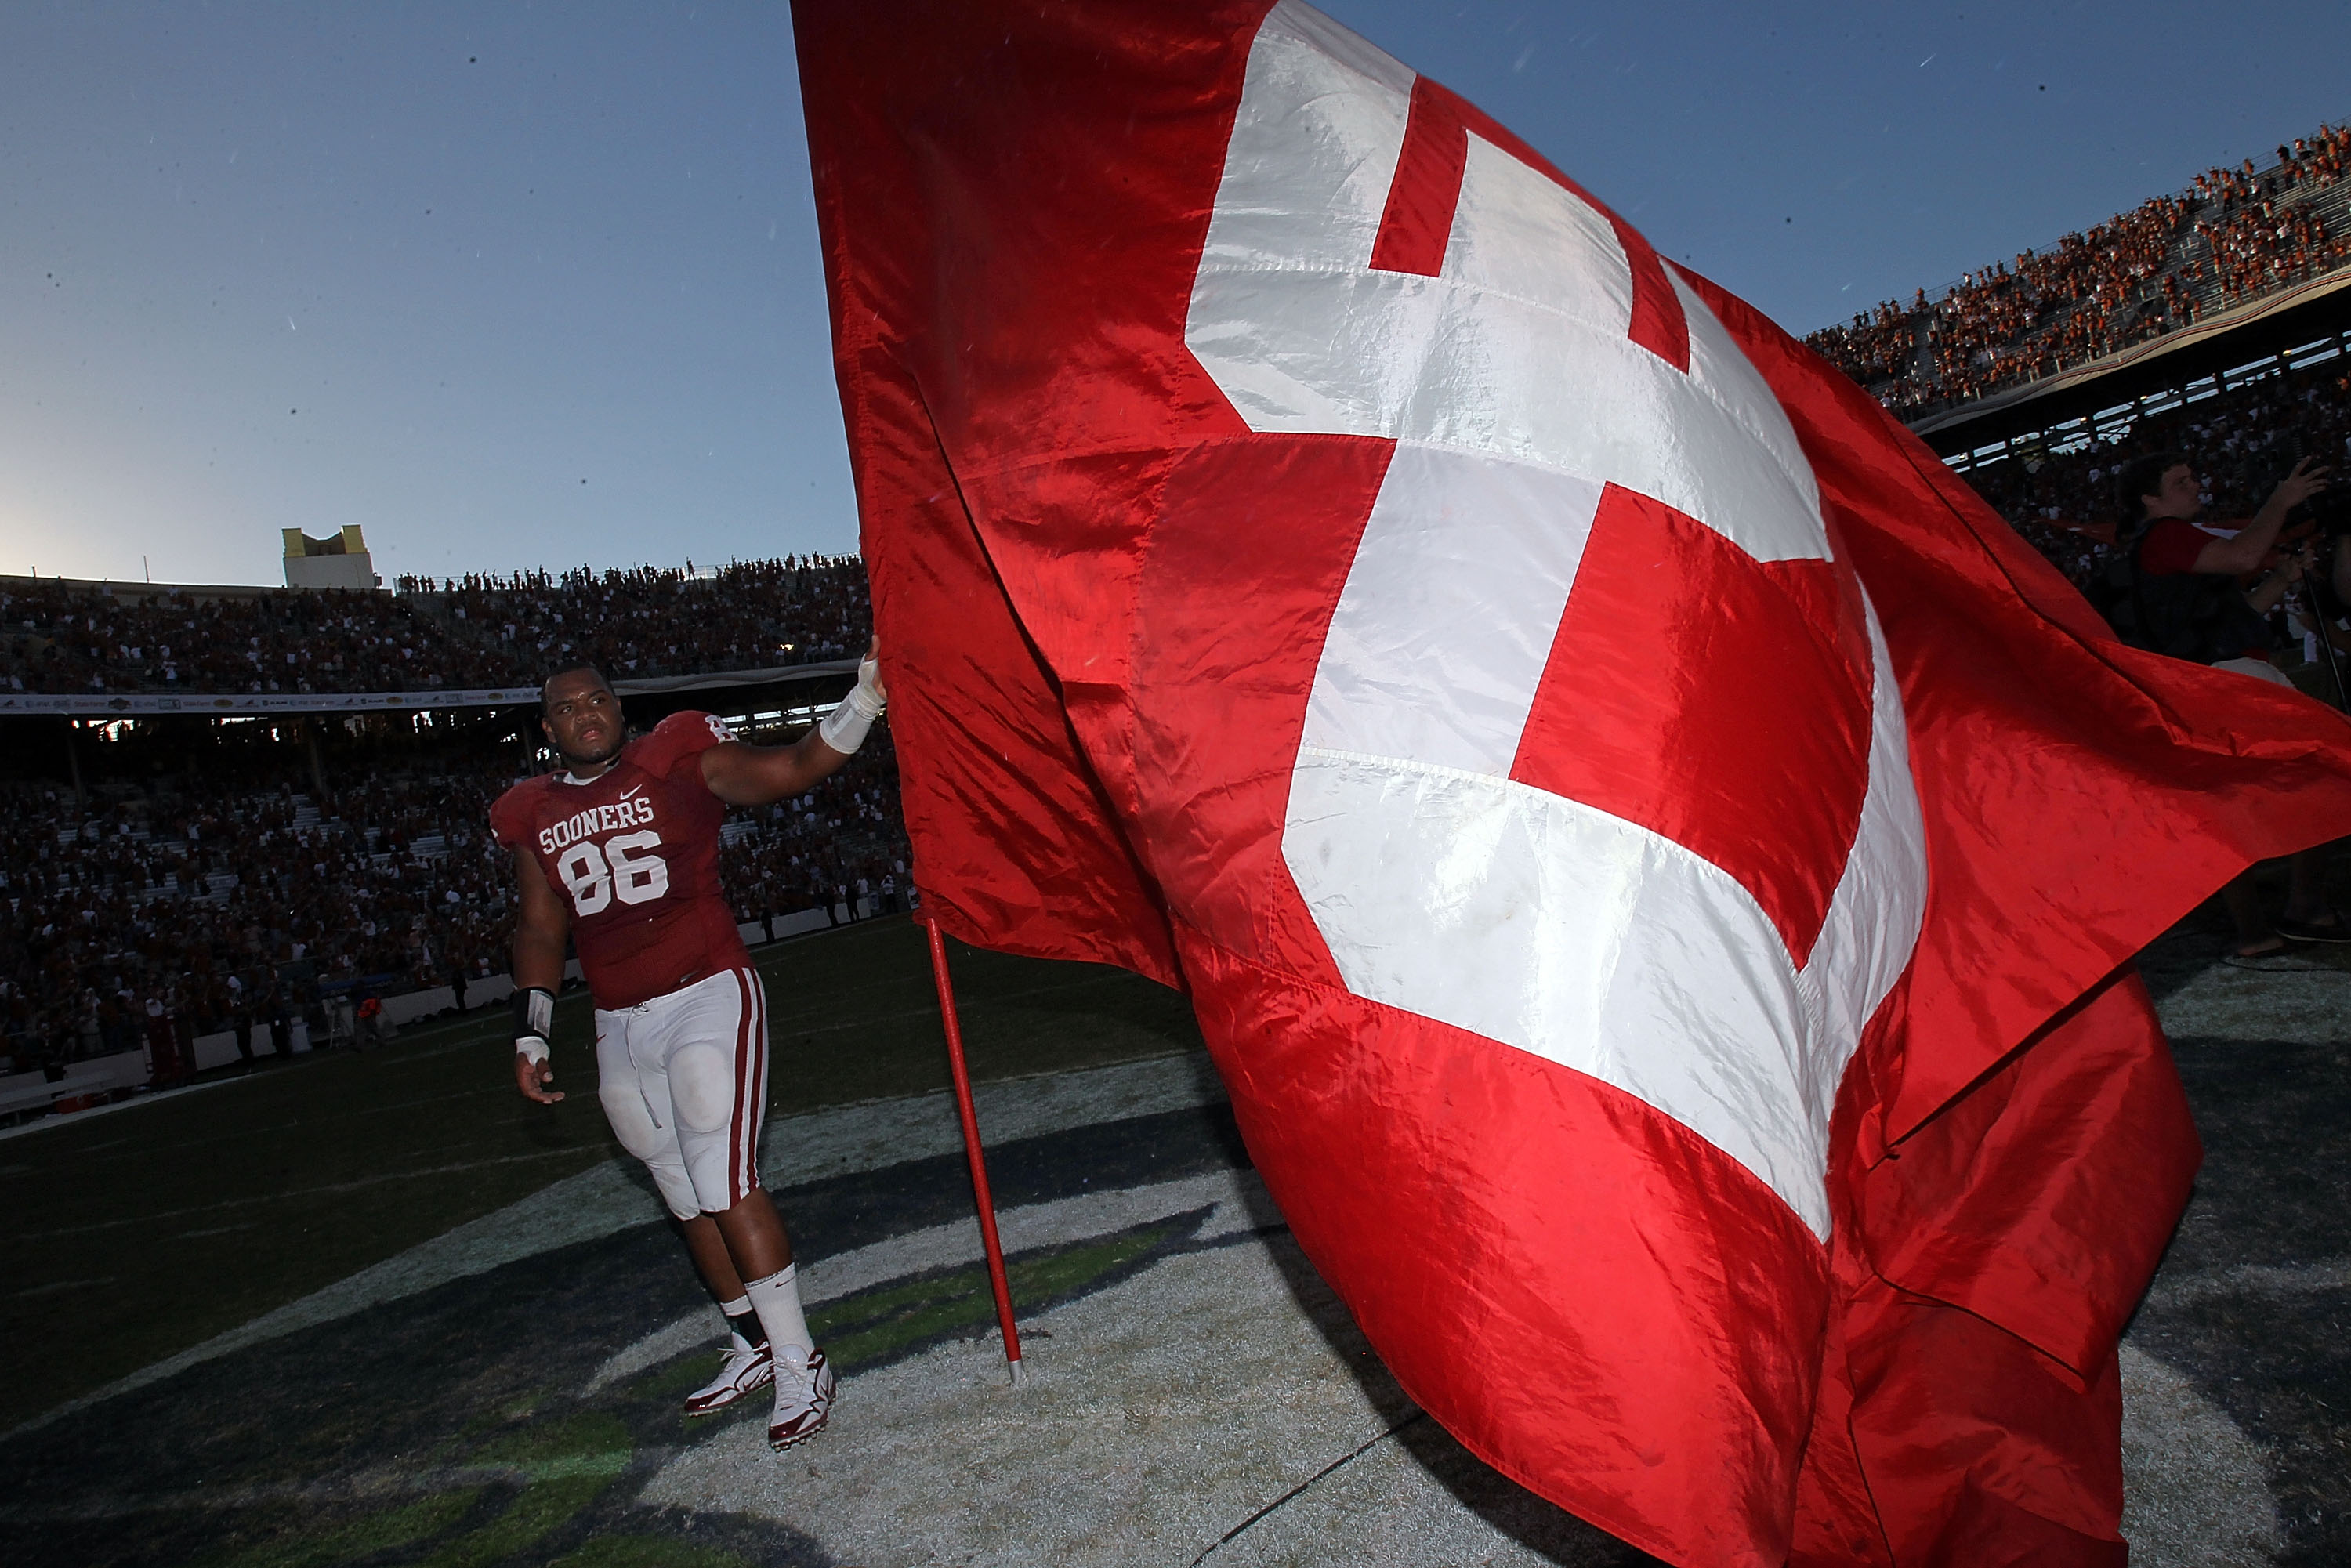 DALLAS - OCTOBER 02:  Defensive tackle Adrian Taylor #86 of the Oklahoma Sooners holds a flag while celebrating a28-20 win against the Texas Longhorns at the Cotton Bowl on October 2, 2010 in Dallas, Texas.  (Photo by Ronald Martinez/Getty Images)